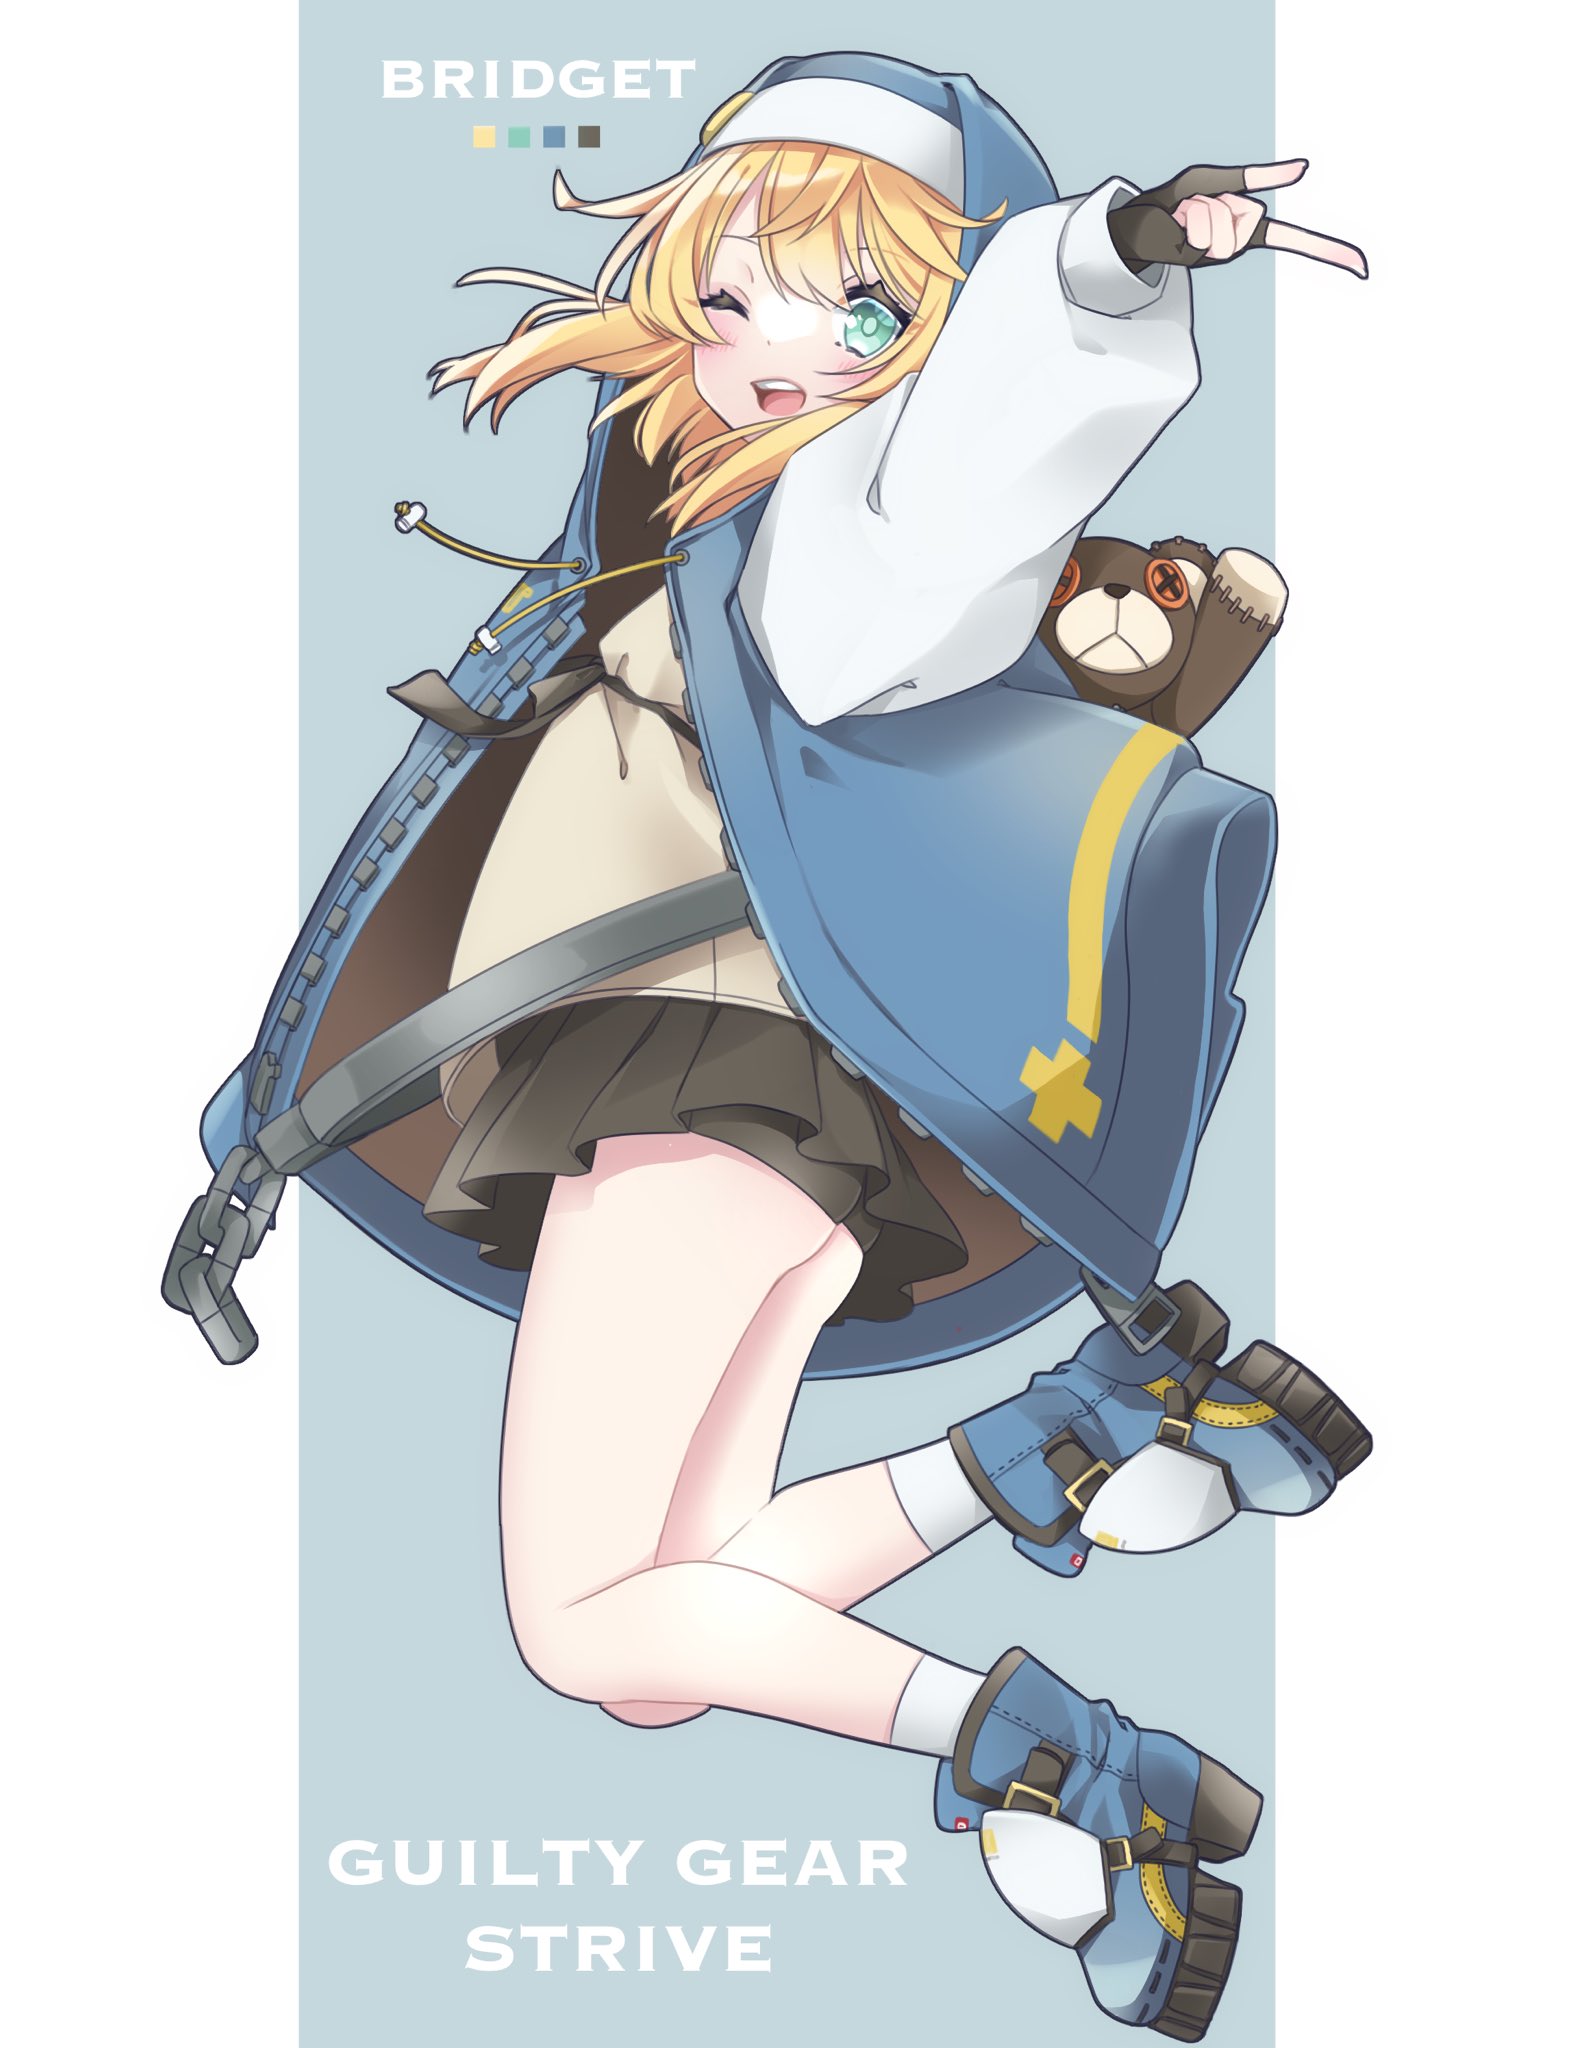 bridget and roger (guilty gear and 1 more) drawn by shashaki